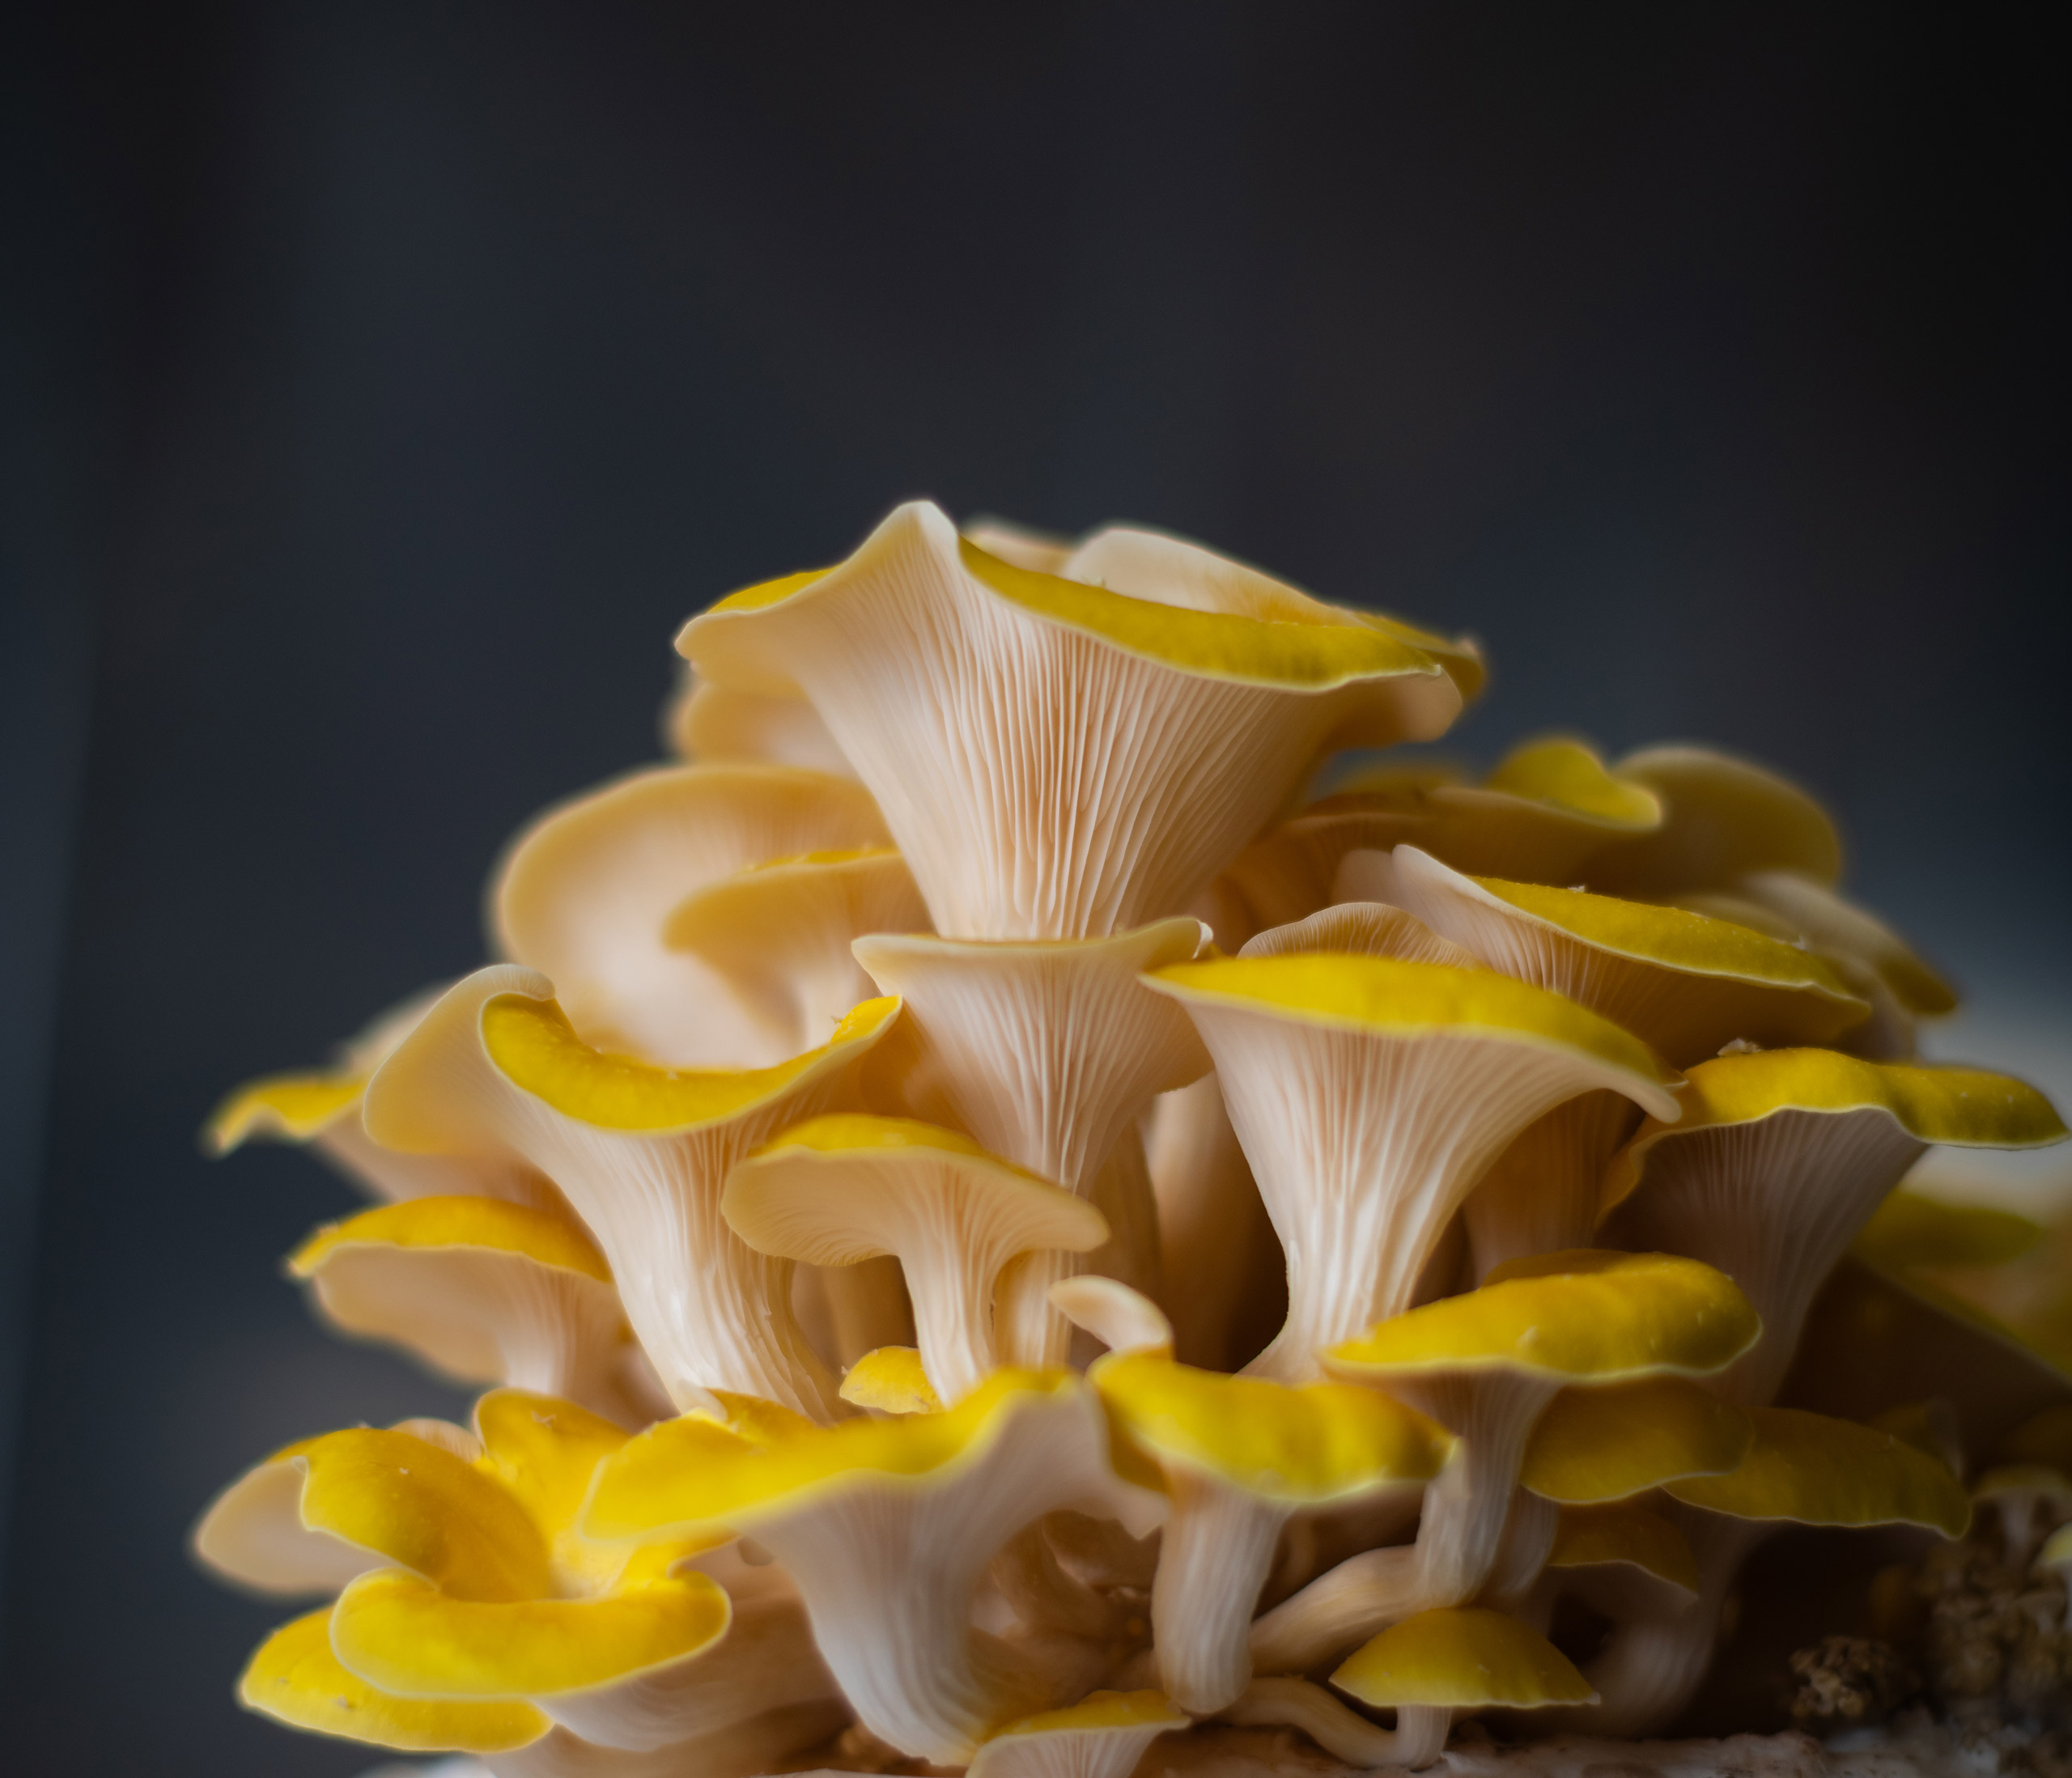 A close-up view of a yellow, trumpet shaped fungus